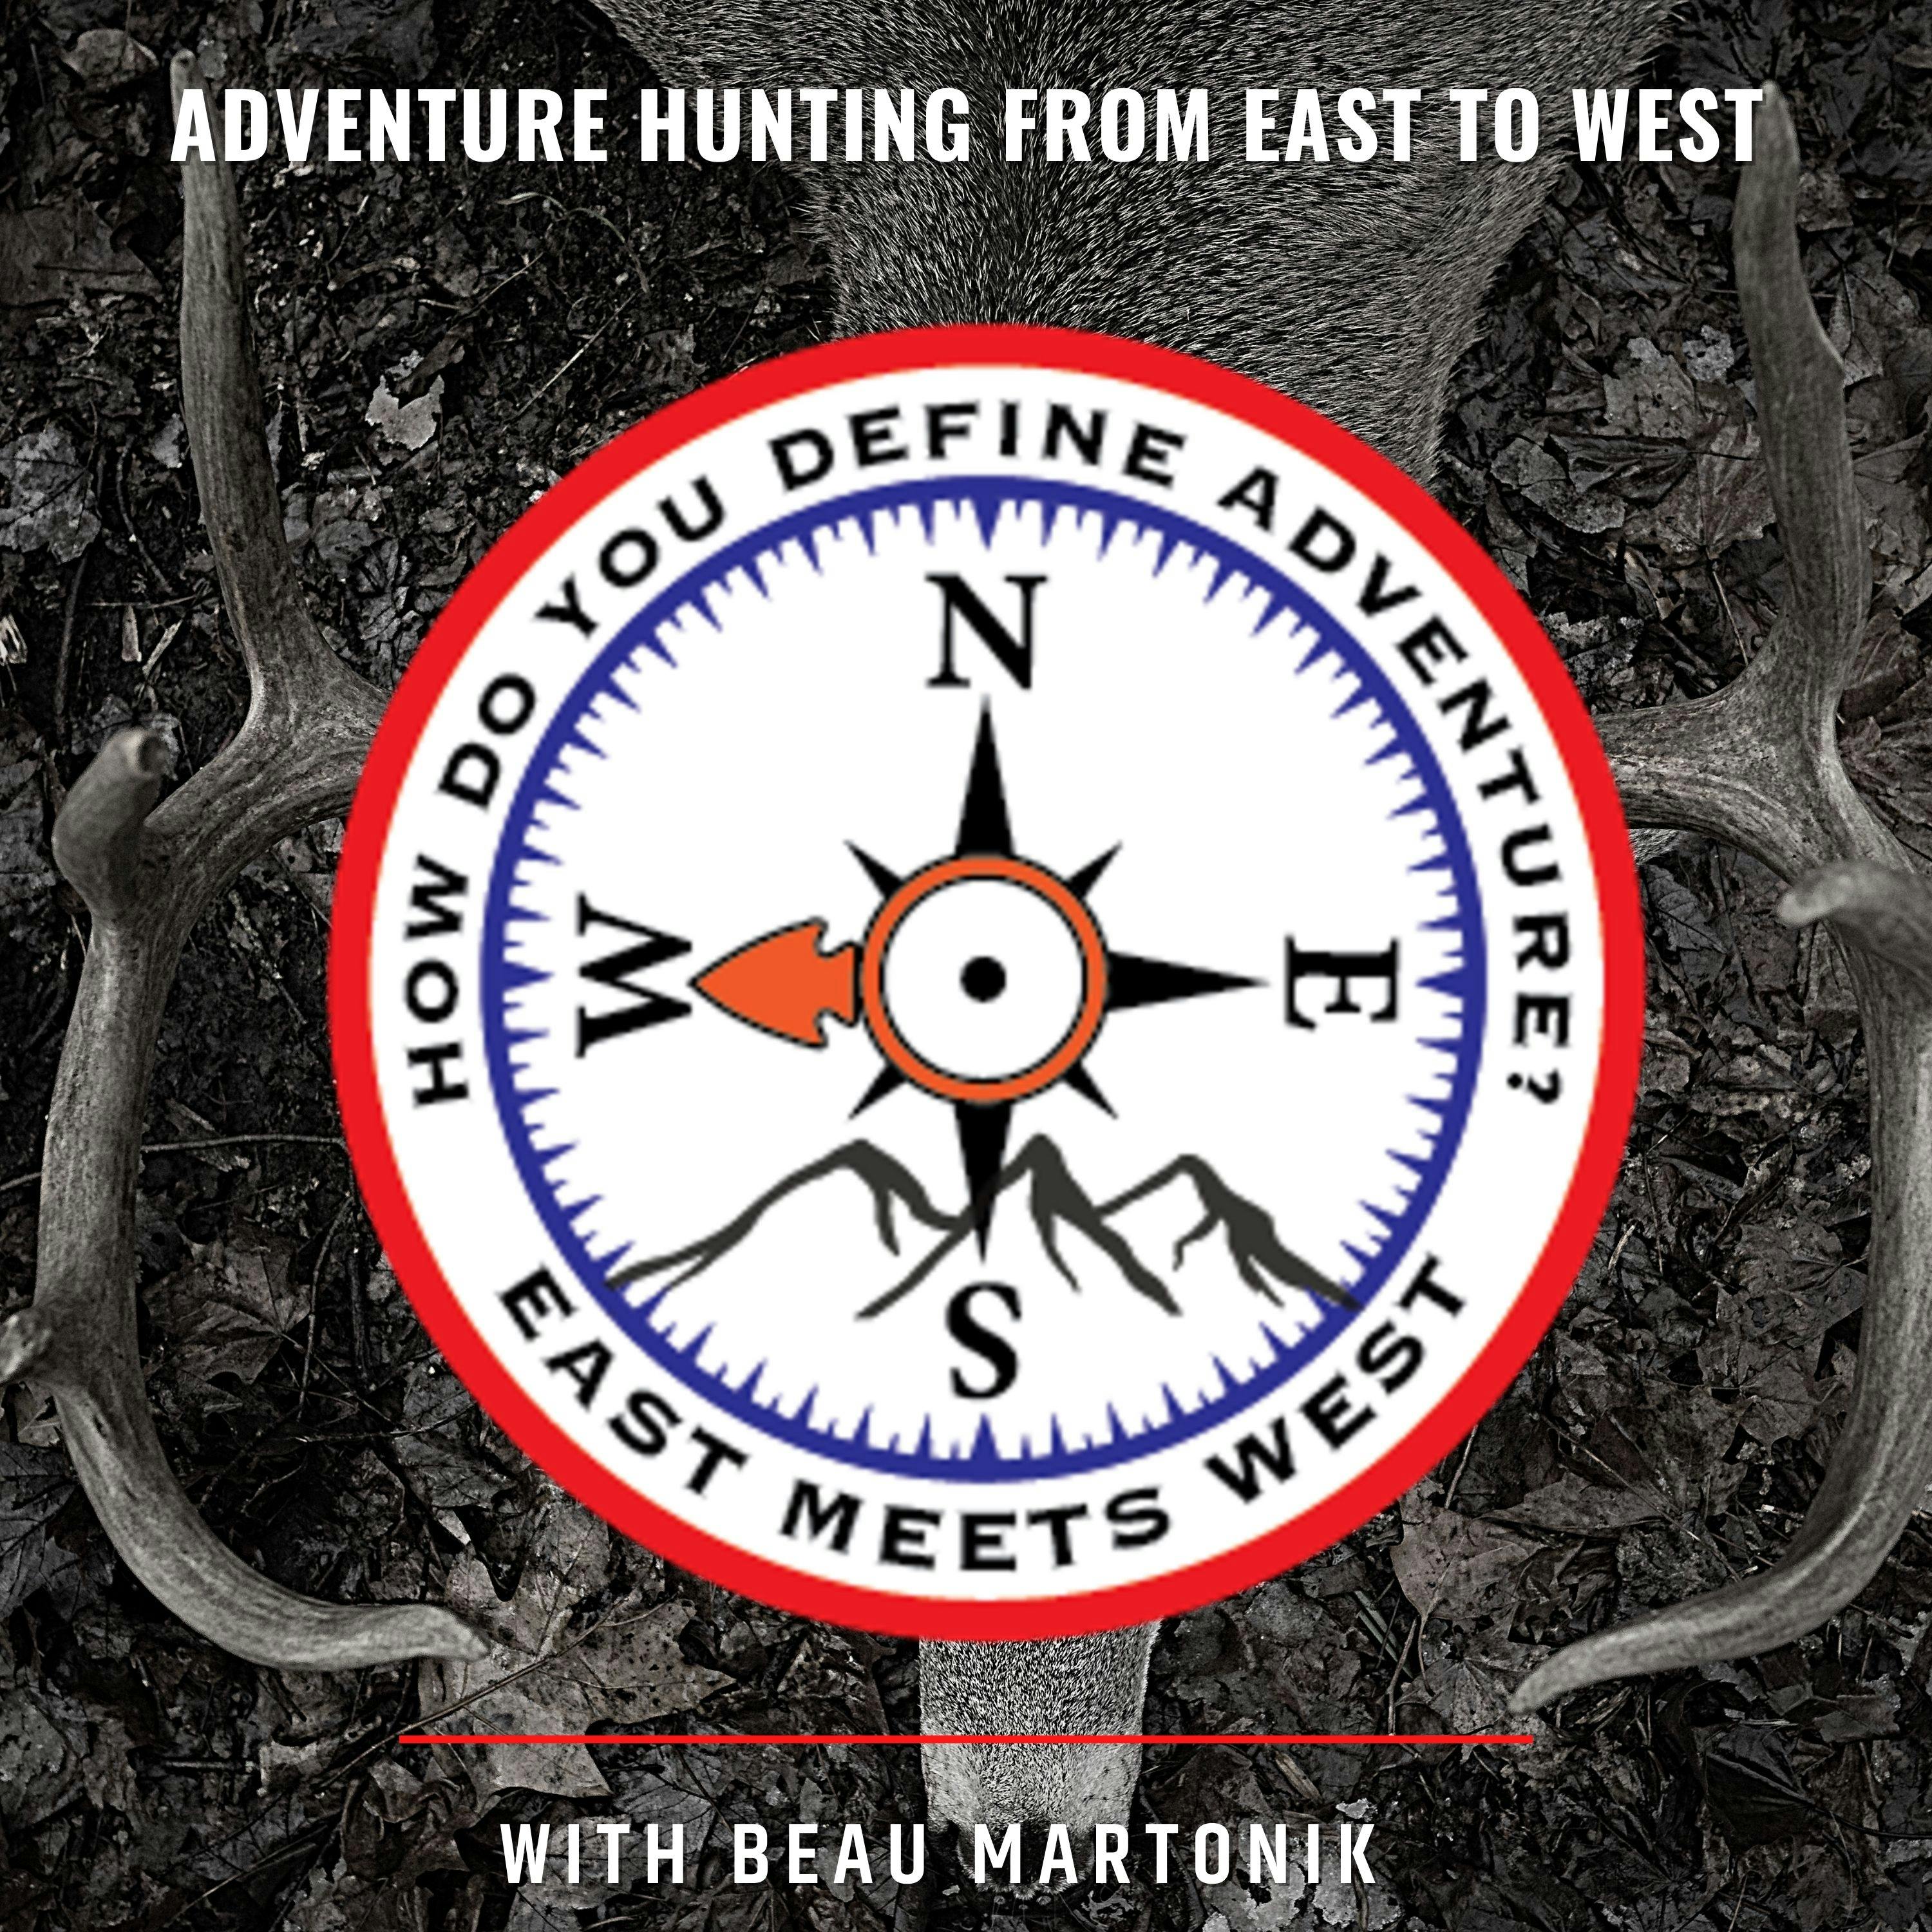 Ep. 271: Rut Stuff - Public Land Calling Strategies and Still-Hunting with Zach Ferenbaugh // The Hunting Public